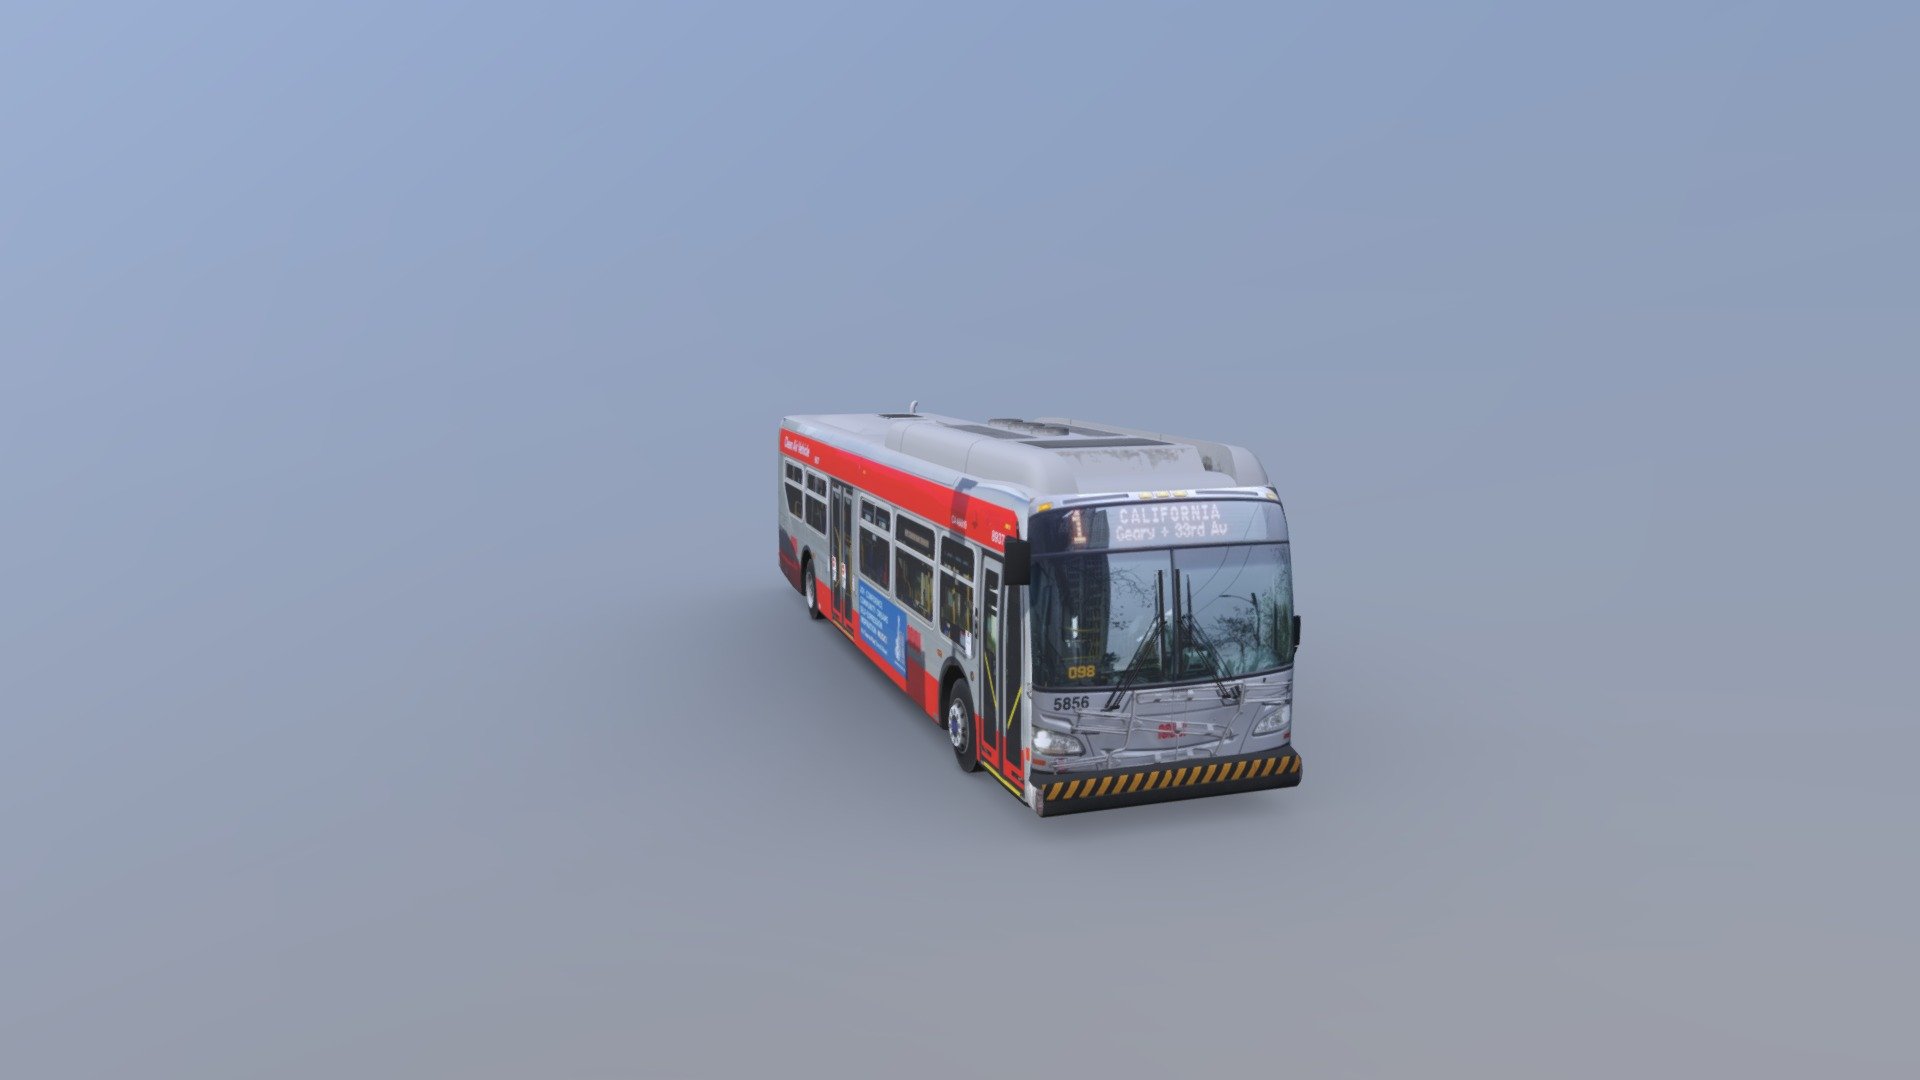 super rough texturing from photos for sfmta muni livery

low poly original model credit twitter.com/_TimTheTerrible used with permission - SFMTA Muni New Flyer XD40 - 3D model by kieranfarr 3d model